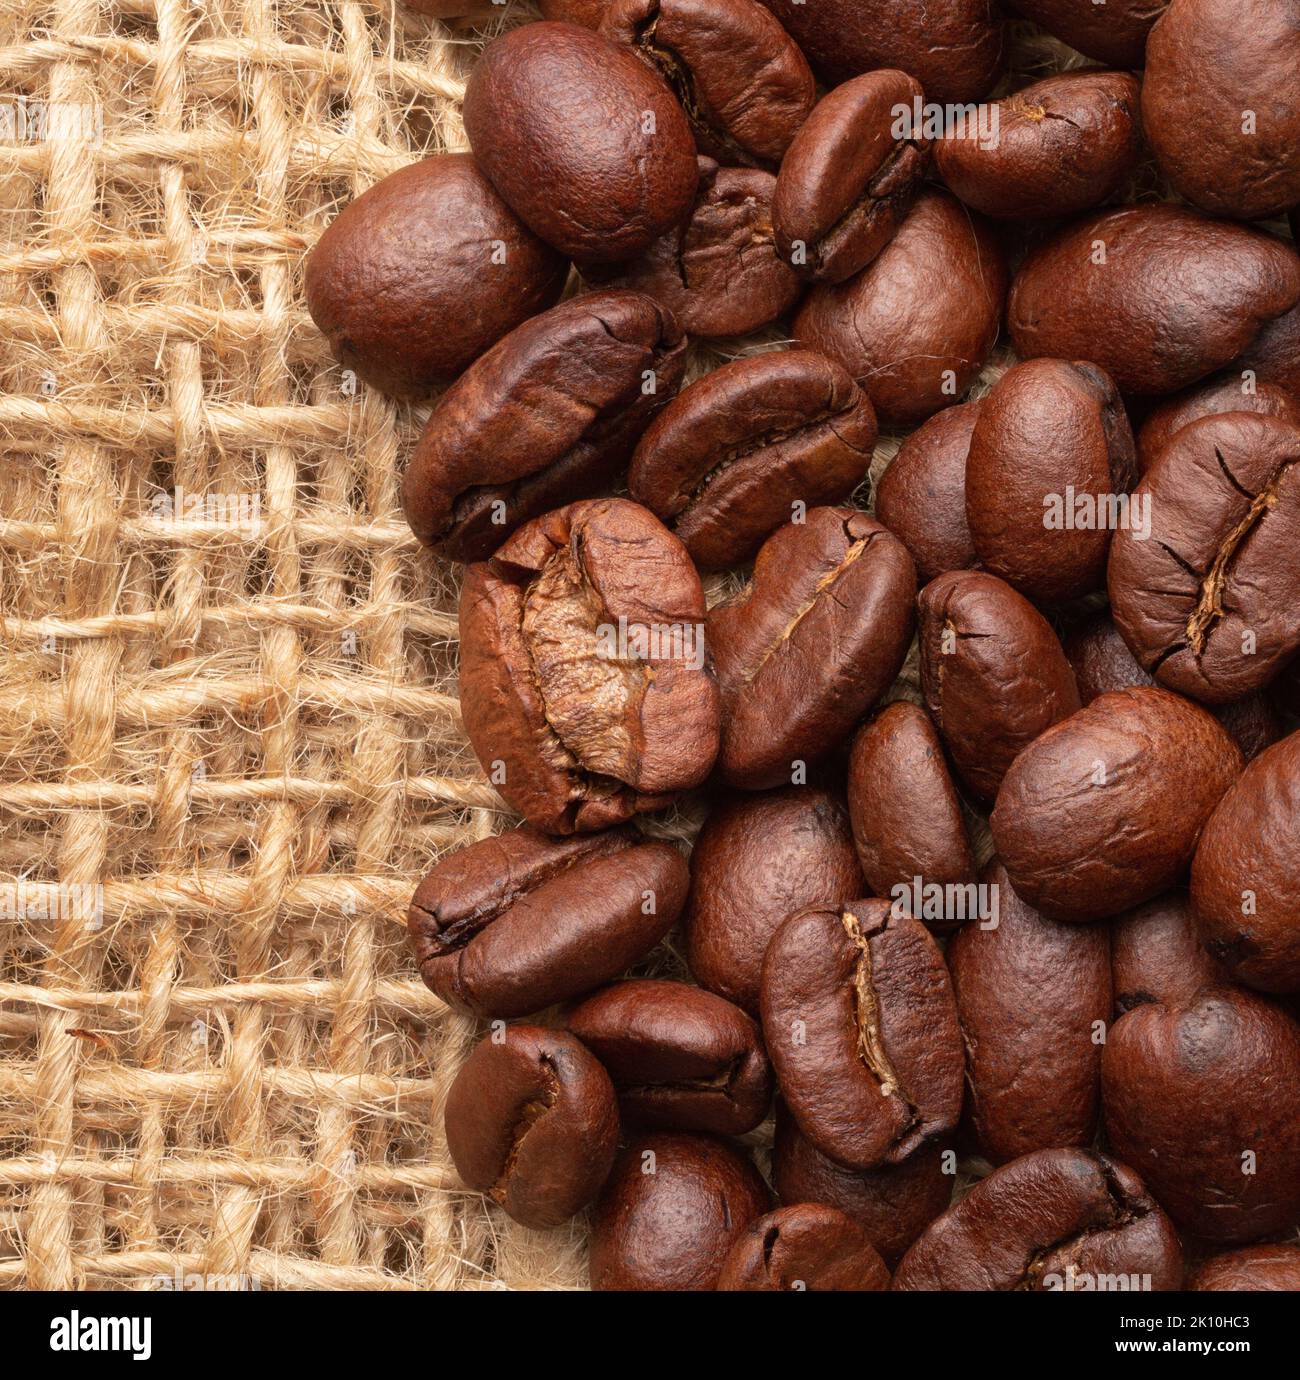 Coffee beans close-up on burlap Stock Photo